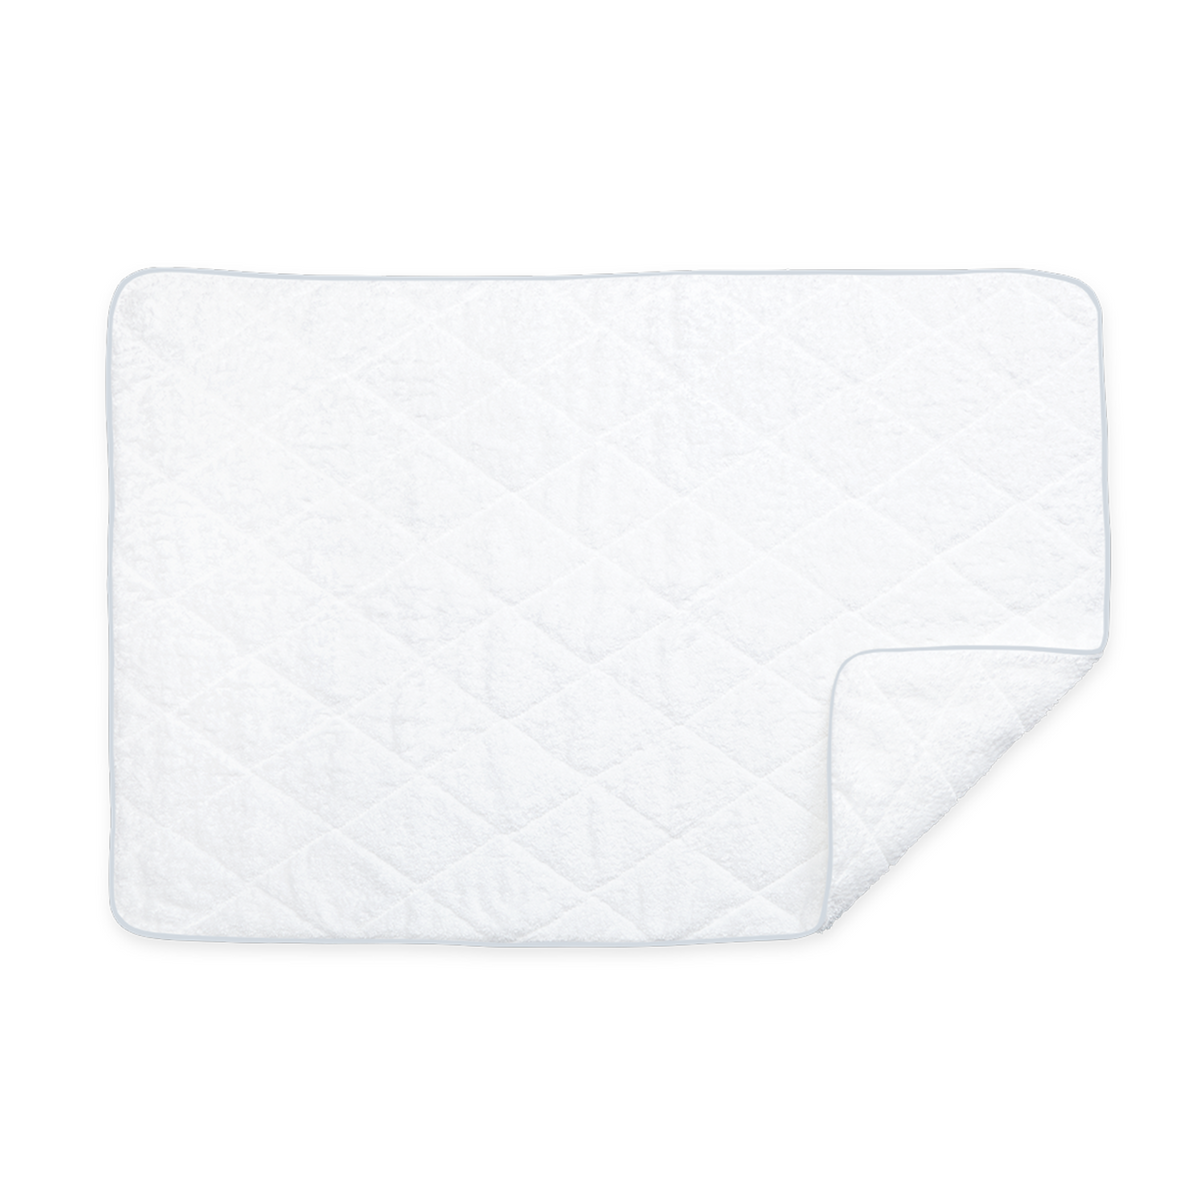 Sample Image of Matouk Cairo Bath Quilted Tub Mat White/Light Blue